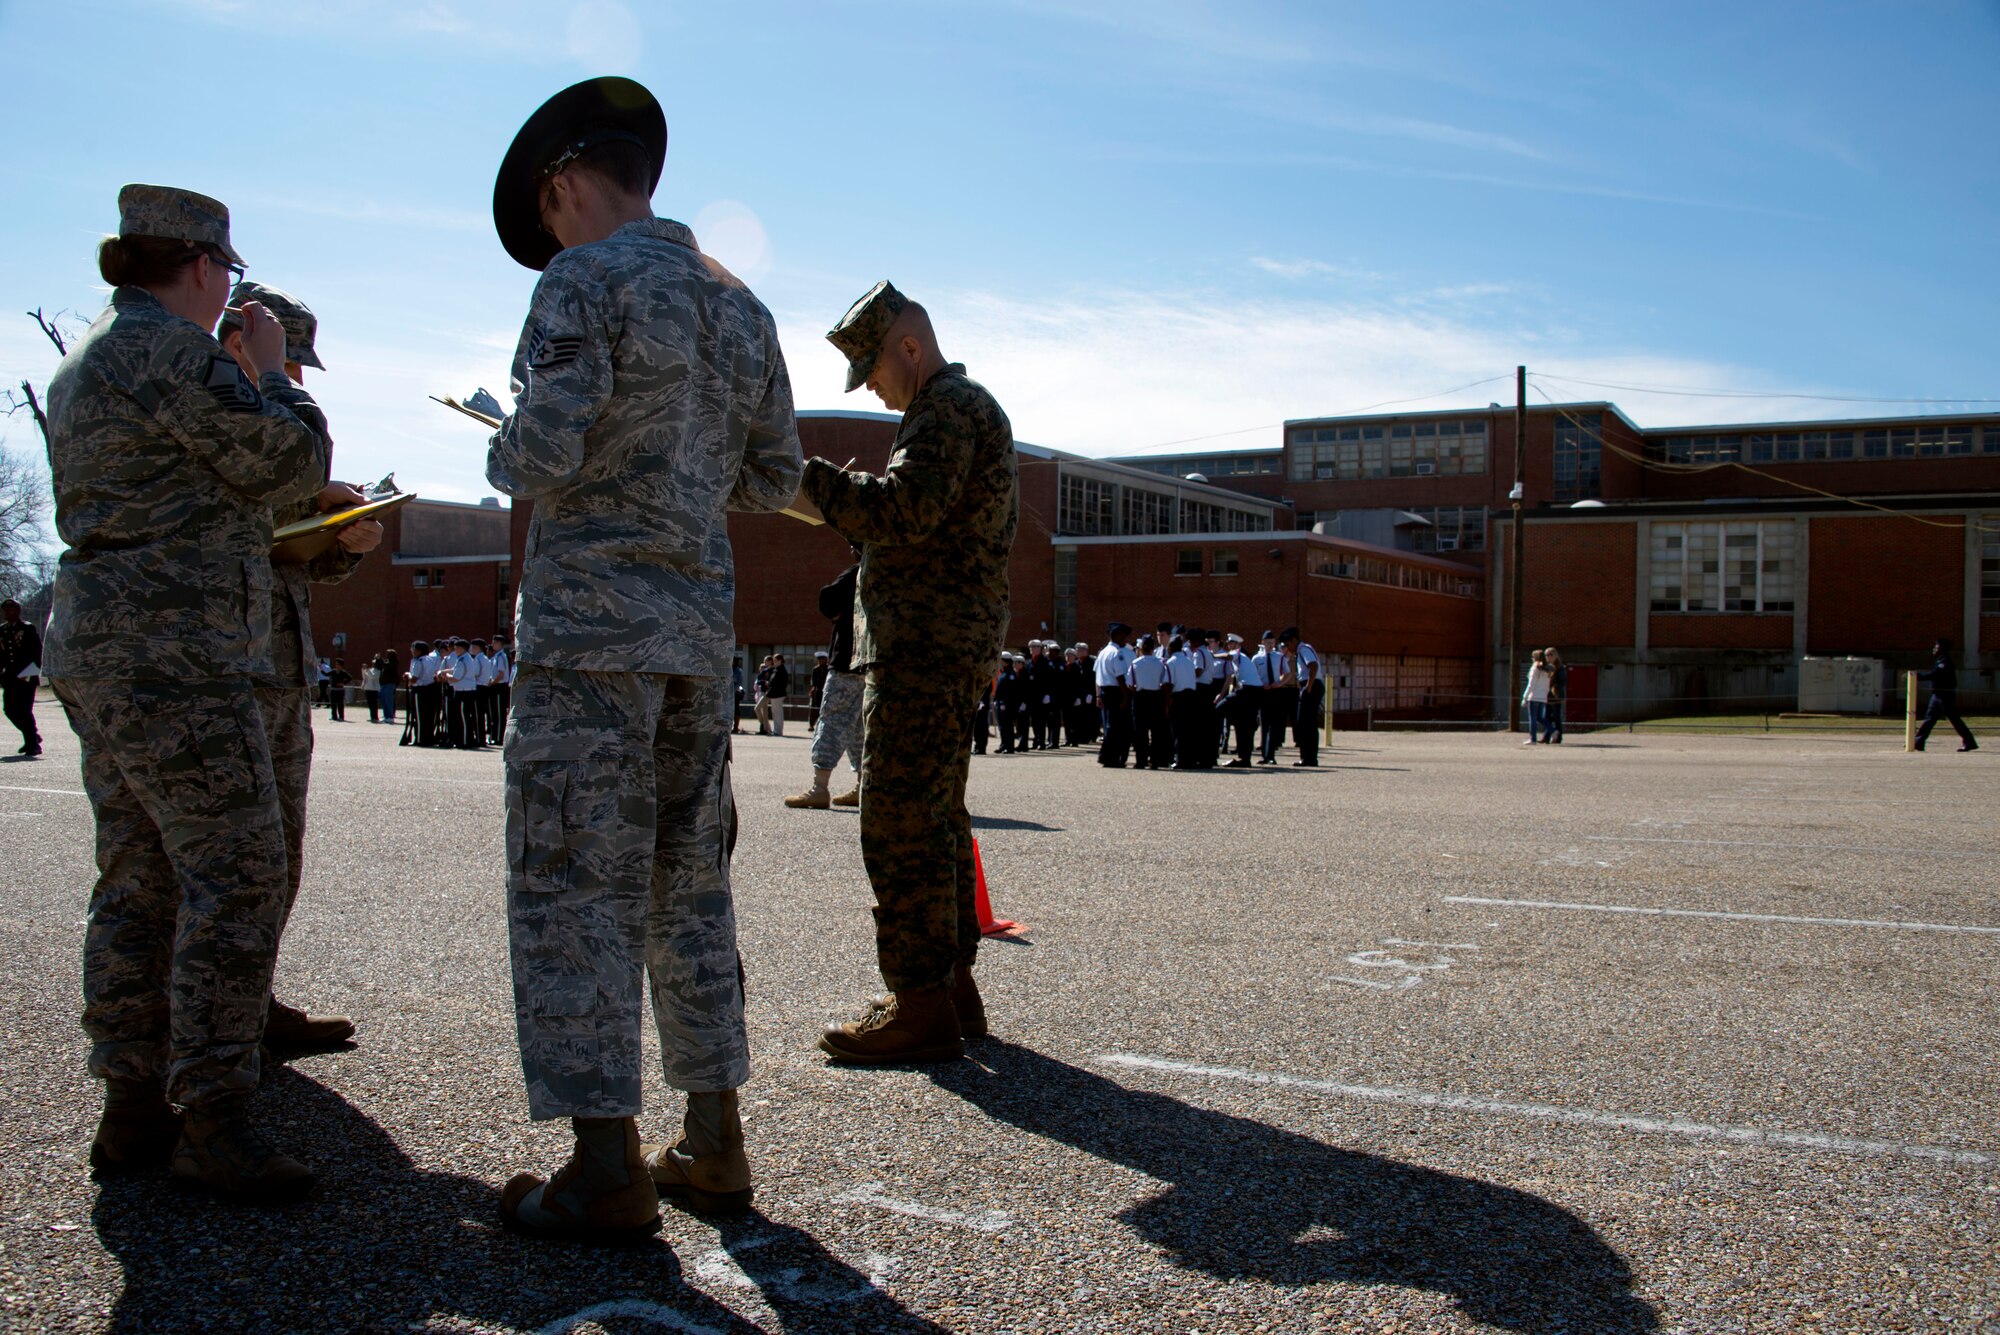 Airmen from Maxwell-Gunter huddle up to finalize the score of a Junior ROTC team’s performance at the Larry Jones Invitational Drill Meet hosted by Robert E. Lee High School, Montgomery, Alabama, Jan. 31, 2015. Approximately 50 Airmen volunteered to judge the cadets on their performance and show their support. (U.S. Air Force photo by Airman 1st Class Alexa Culbert/Cleared)